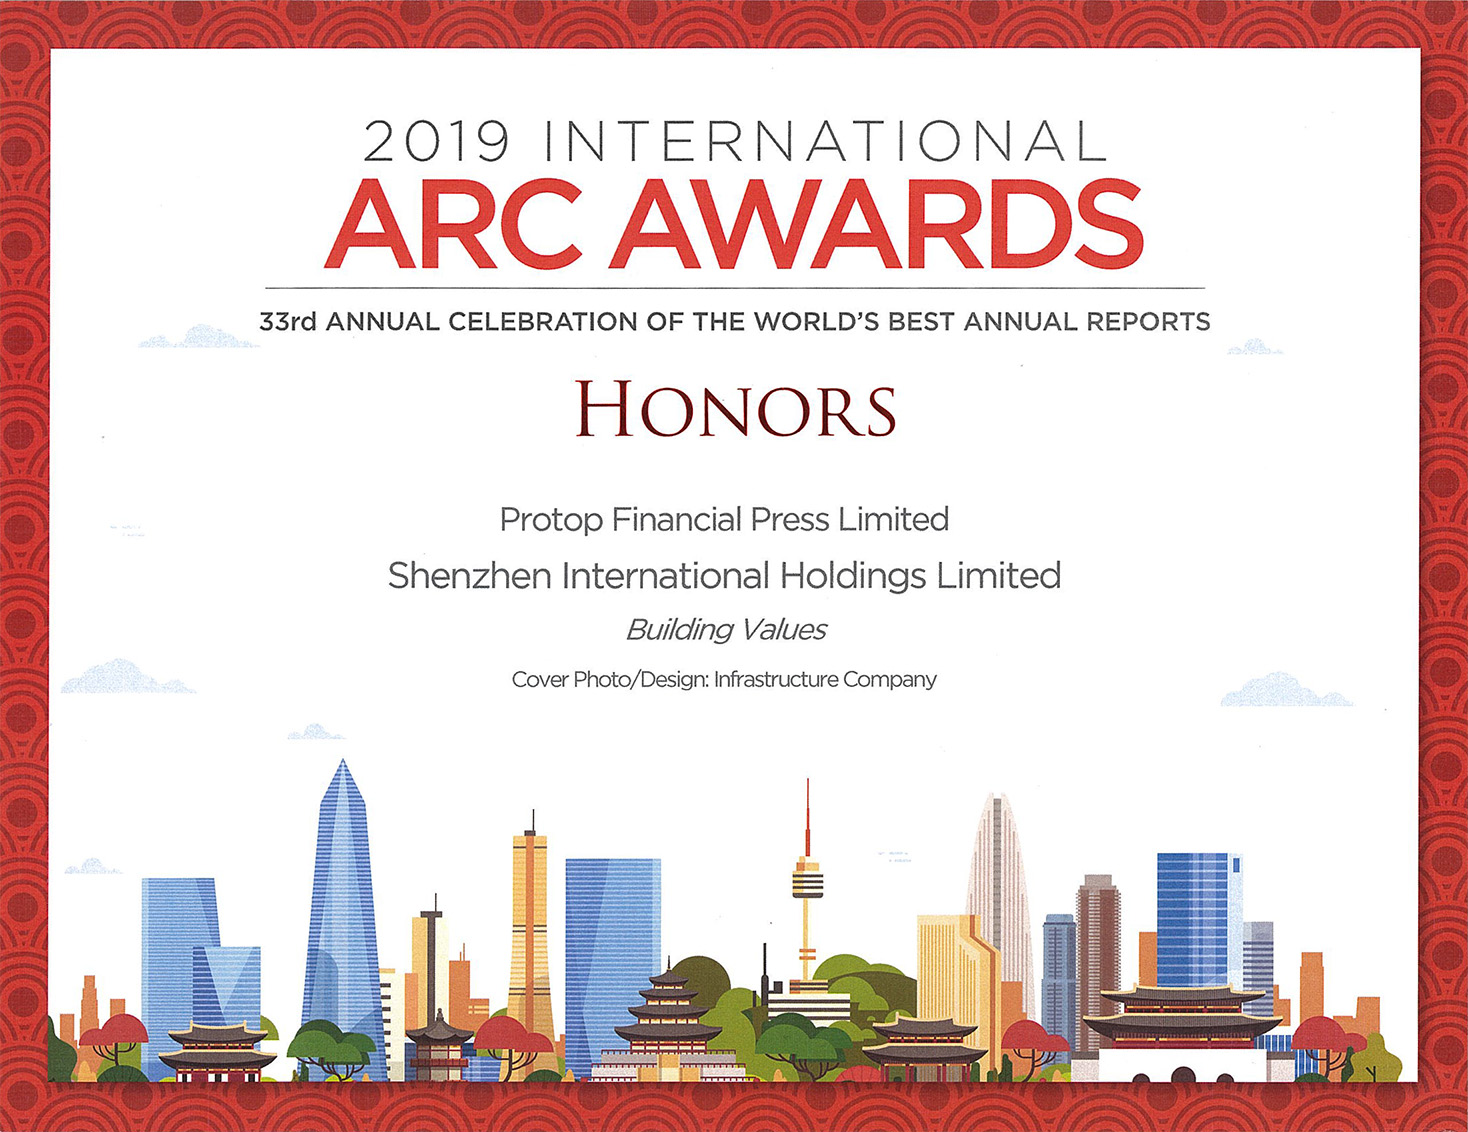 Shenzhen International Holdings Limited – 2019 ARC AWARDS HONORS Cover Photo/Design: Infrastructure Company